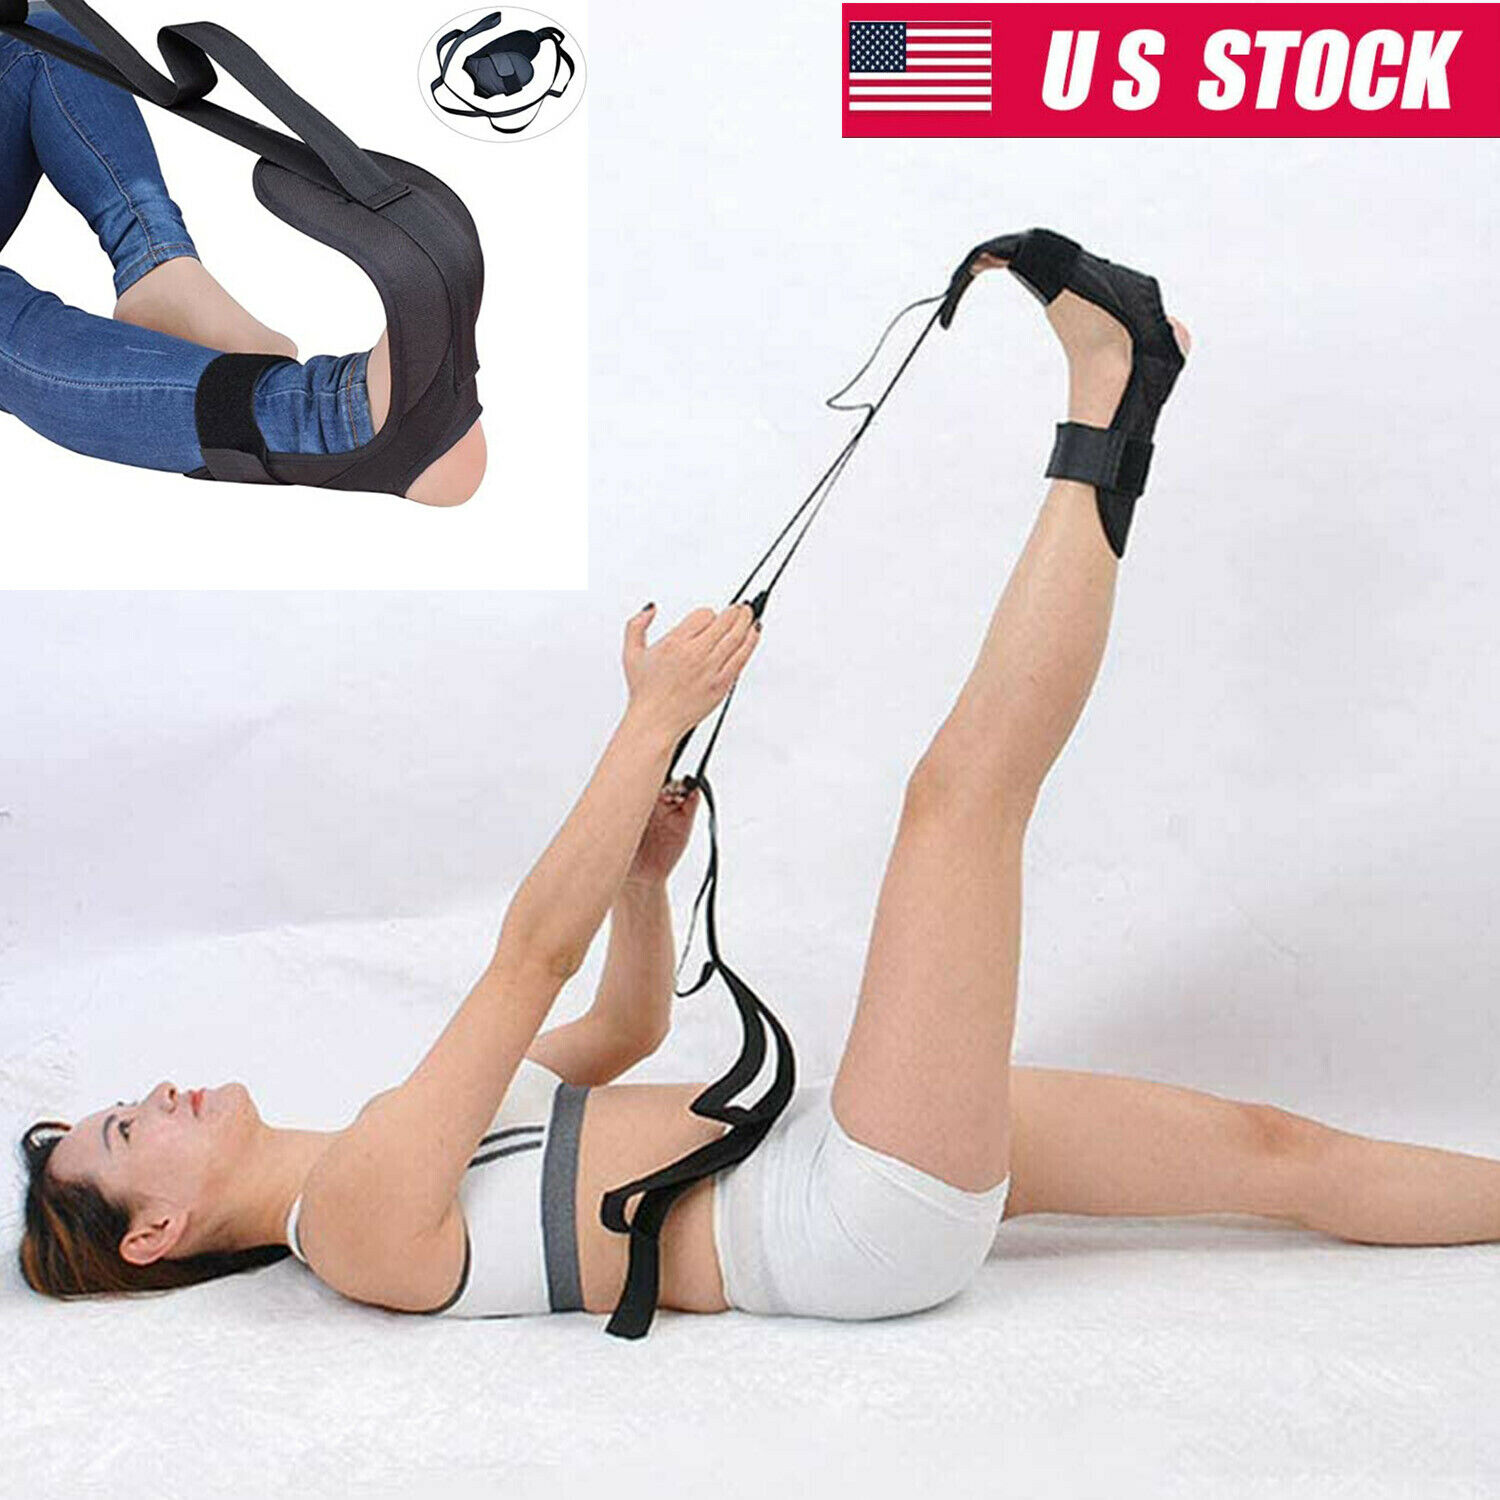 Yoga Ligament Stretching Belt Foot Drop Strap Leg Training Foot Correct Ankle